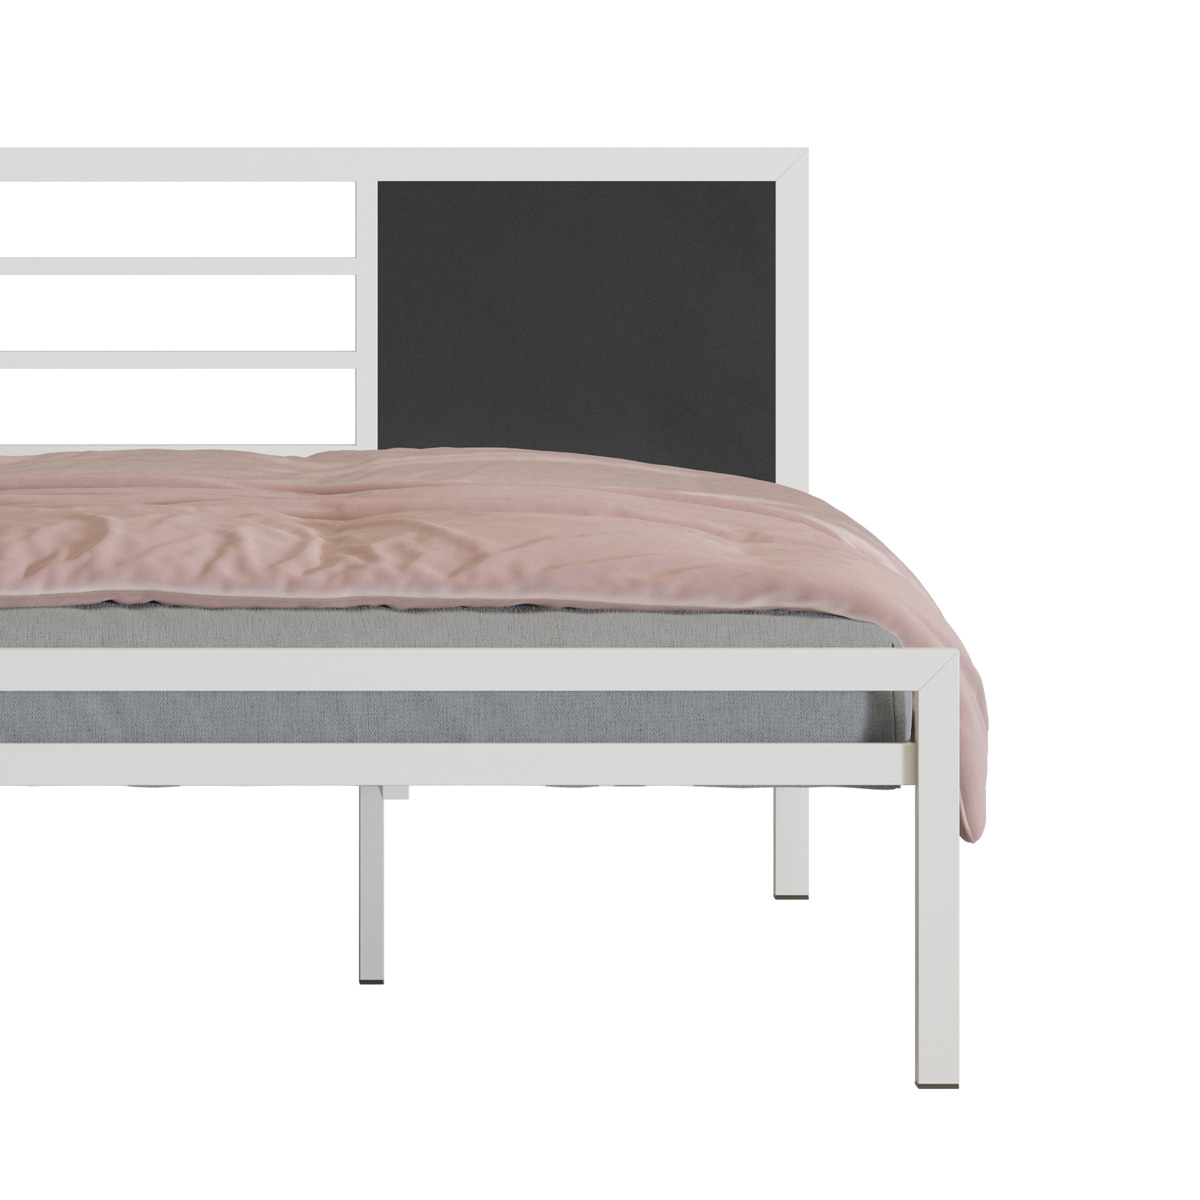 BED- SUNAYA DOUBLE BED-BDH-244-2-1-99 (WHITE)